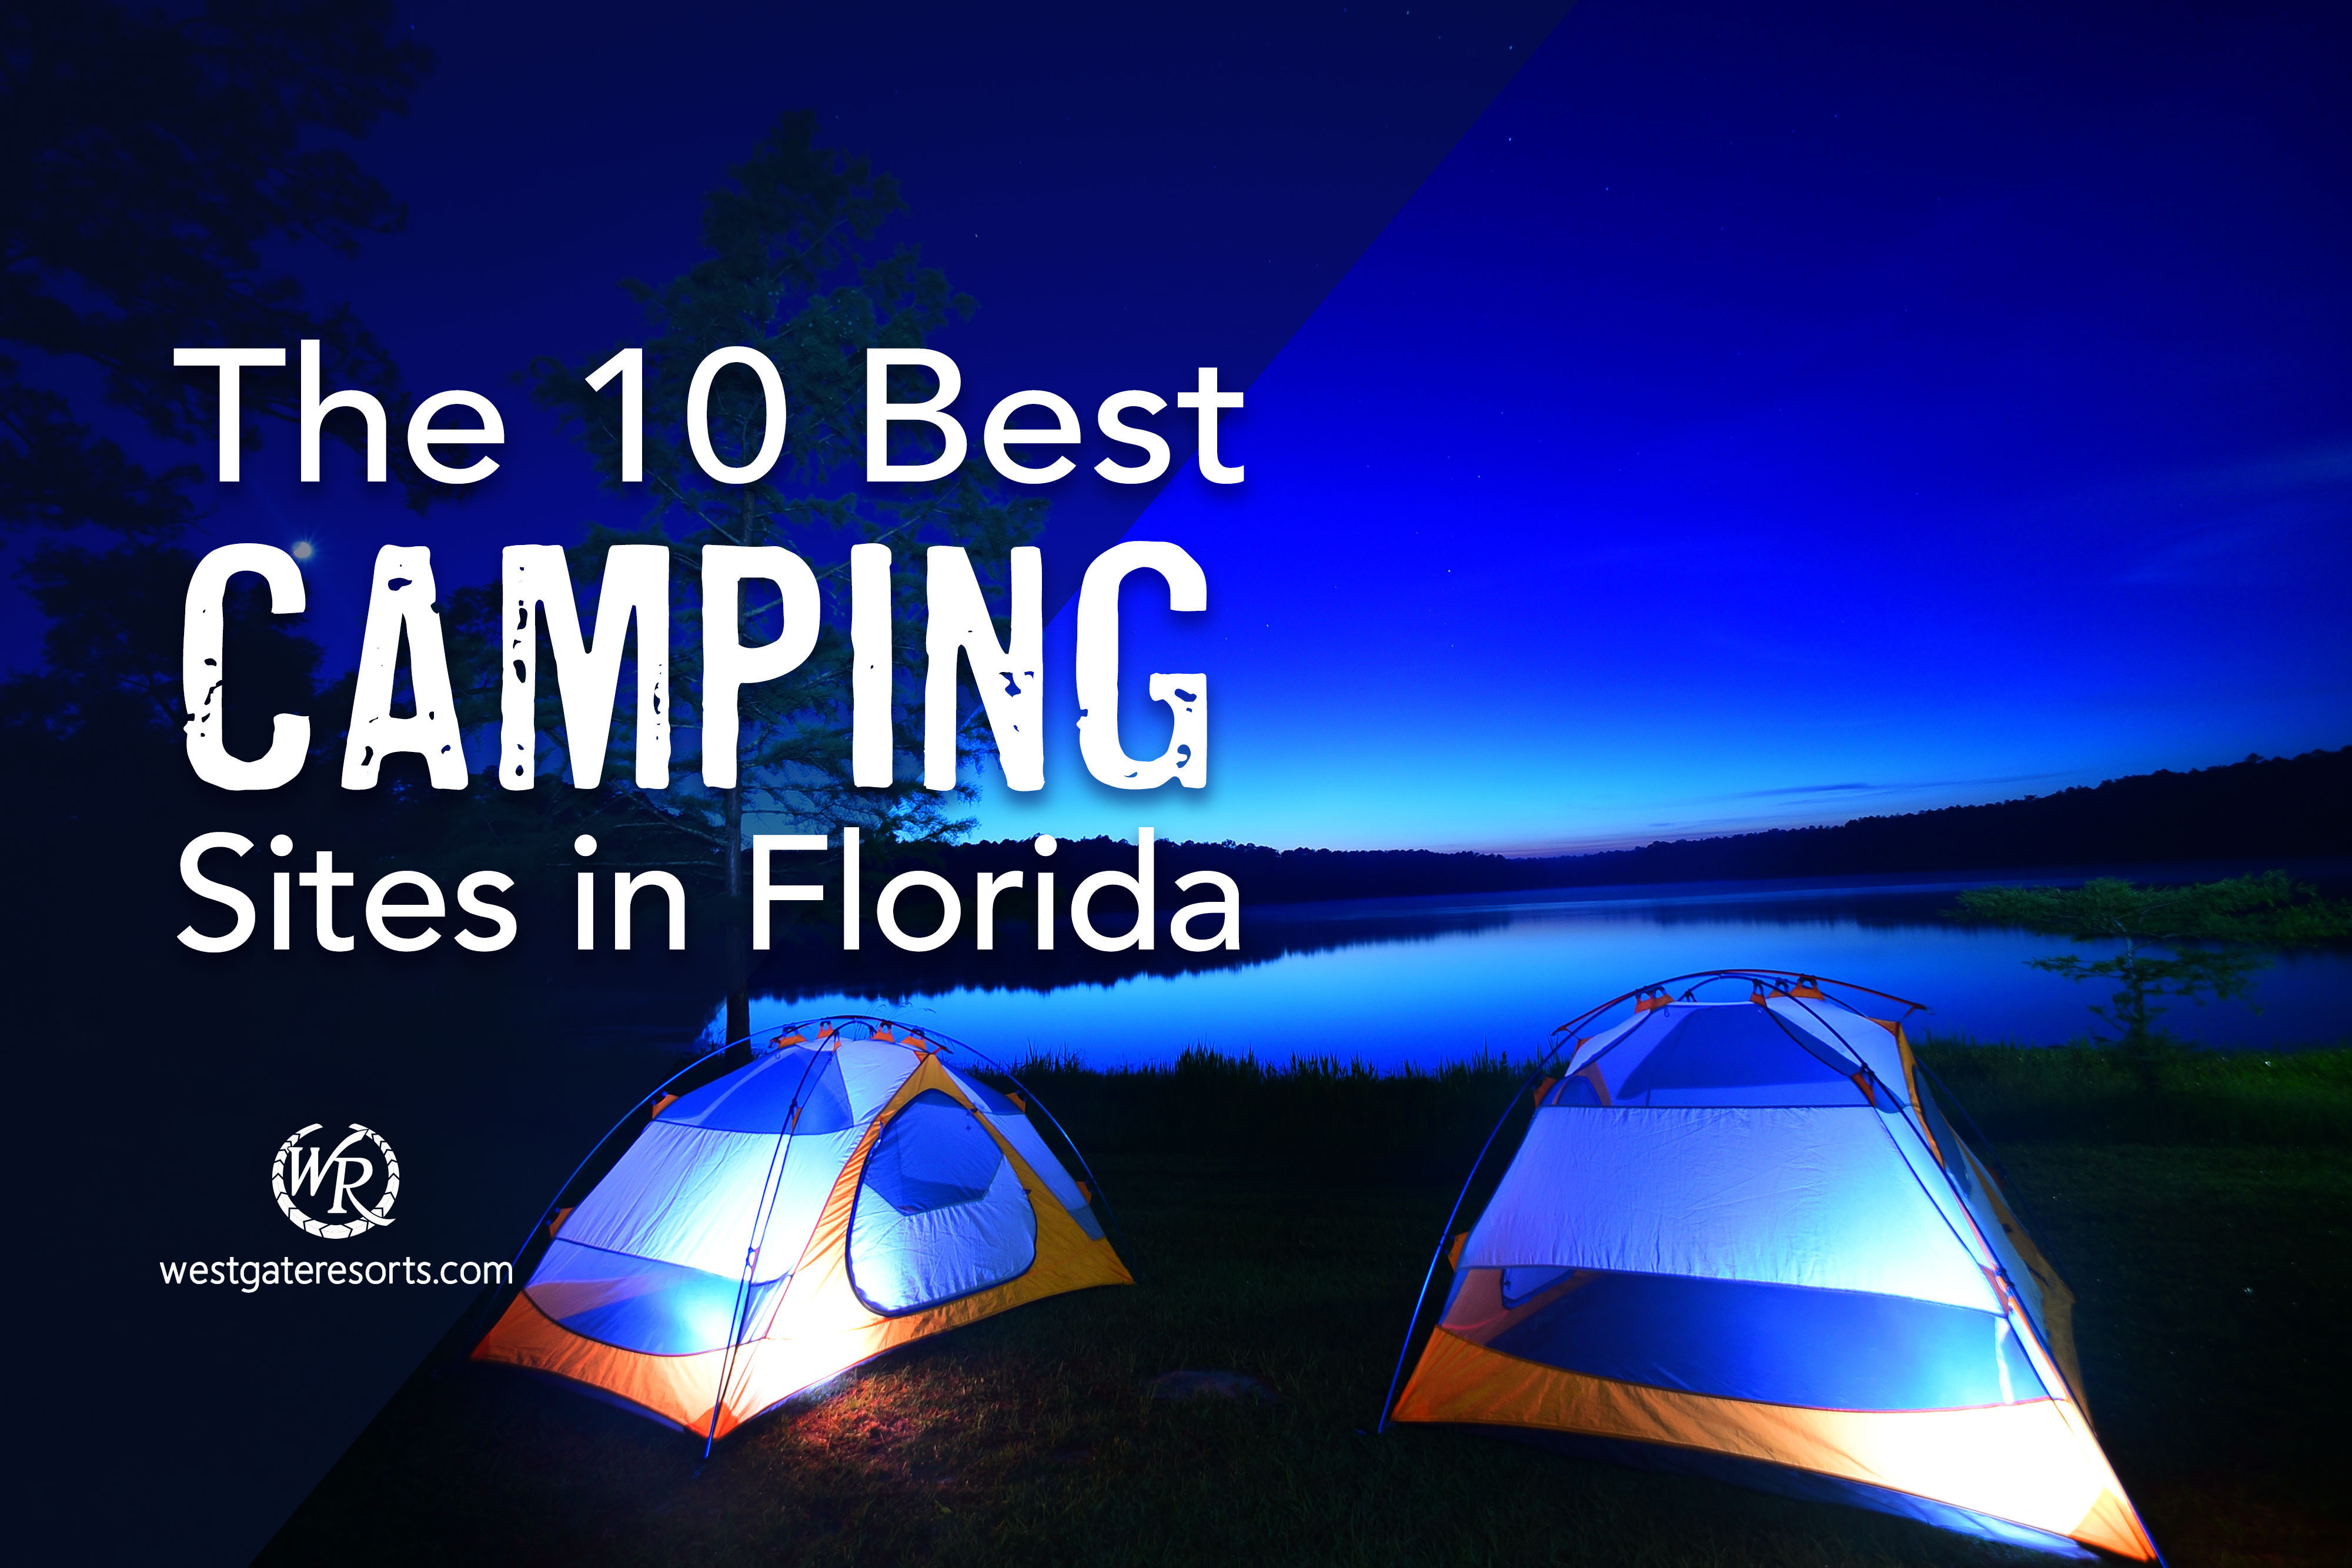 The 10 Best Camping Sites in Florida For Families